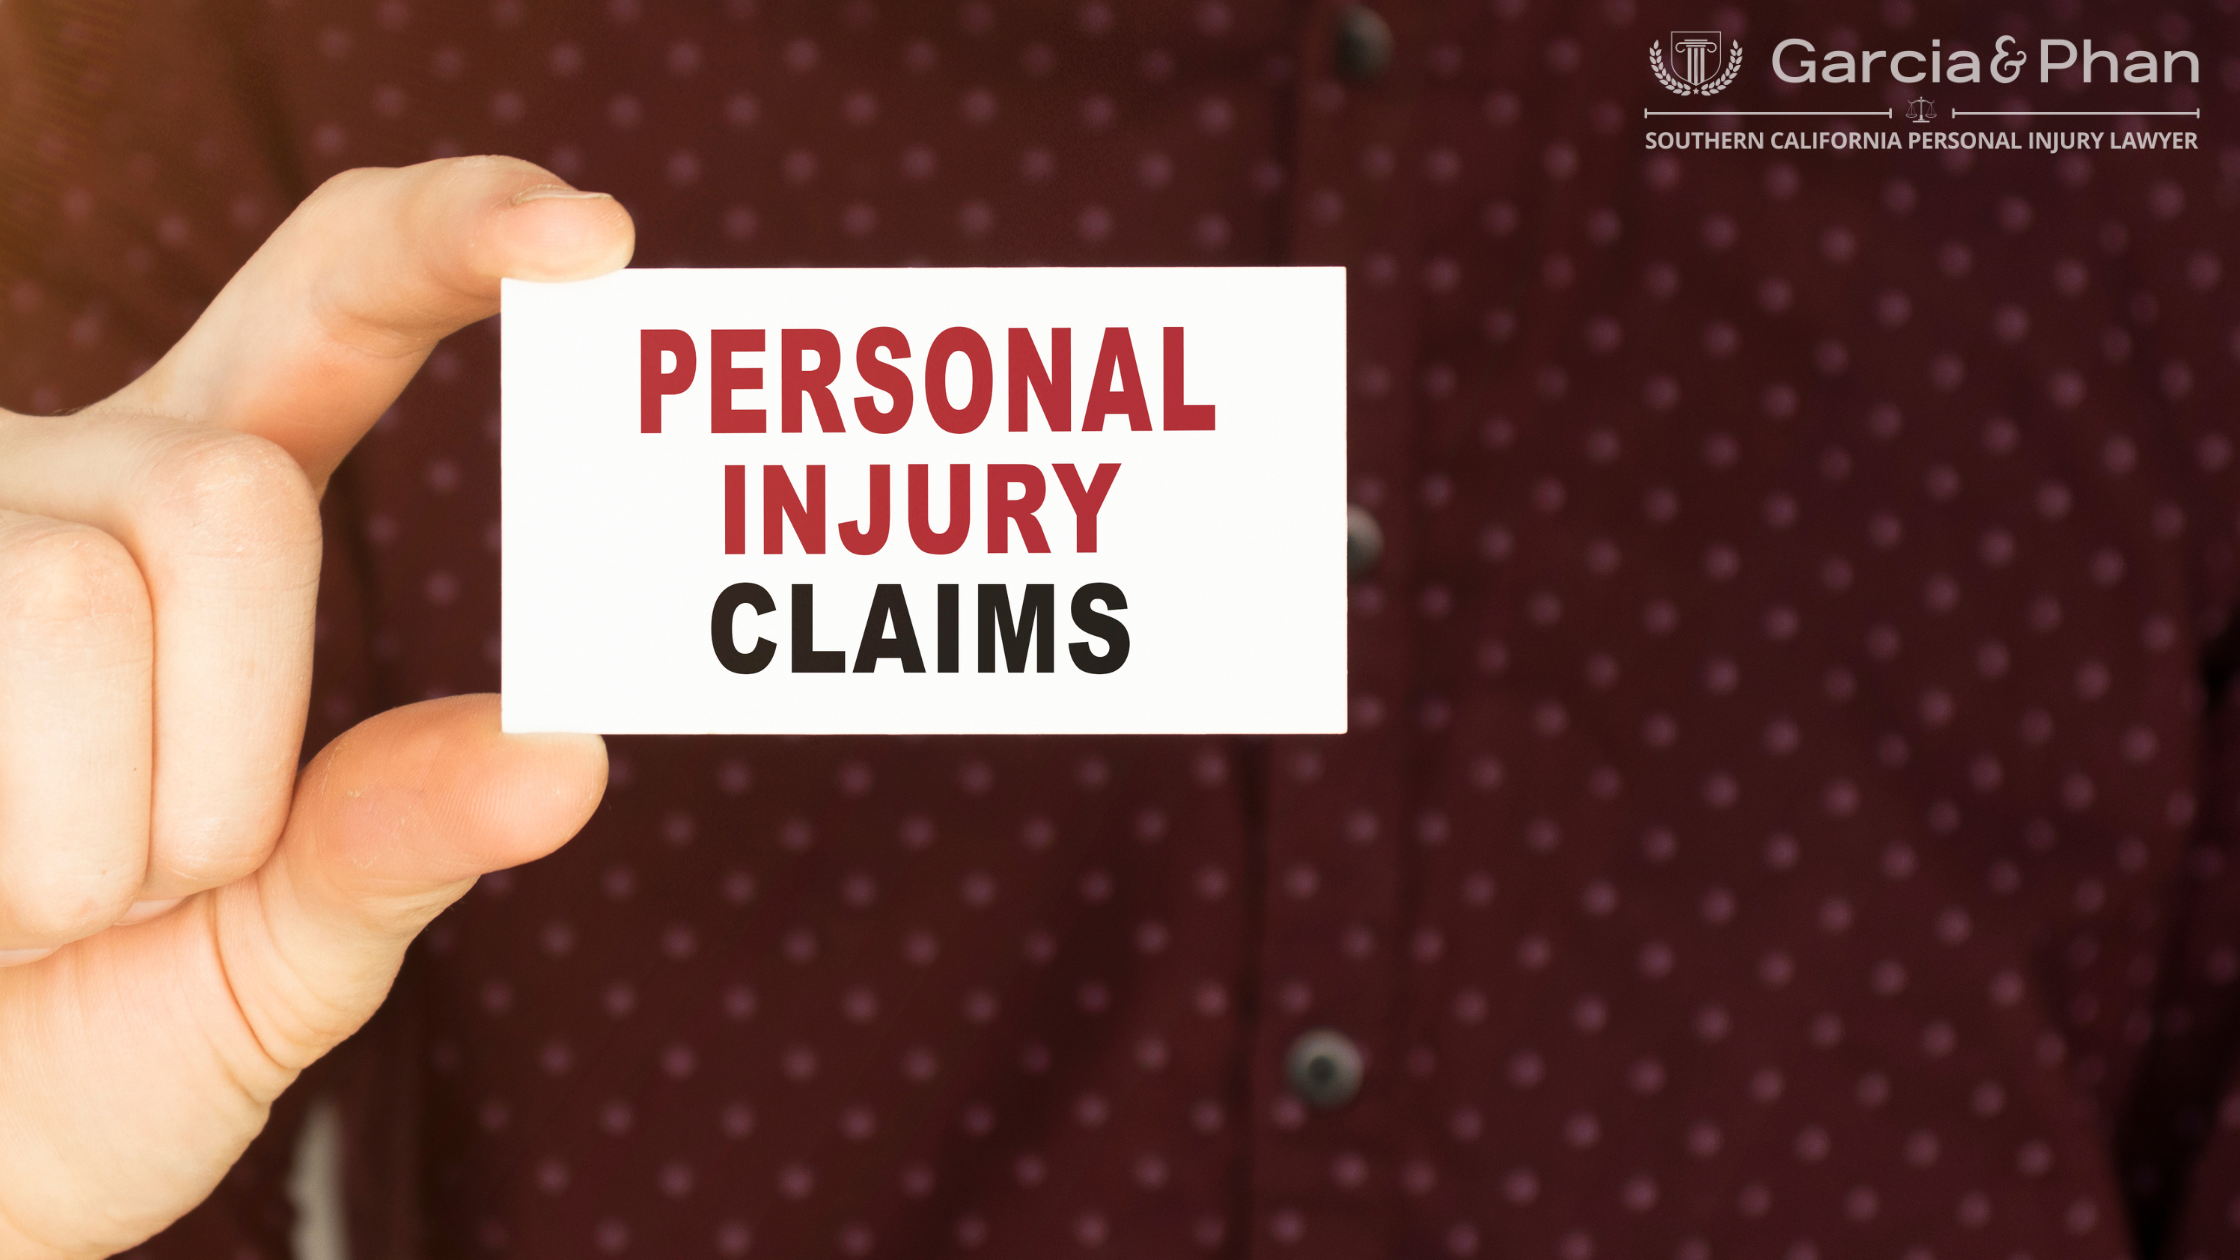 5 Things To Do If Your Personal Injury Claim Goes To Trial | Garcia Phan